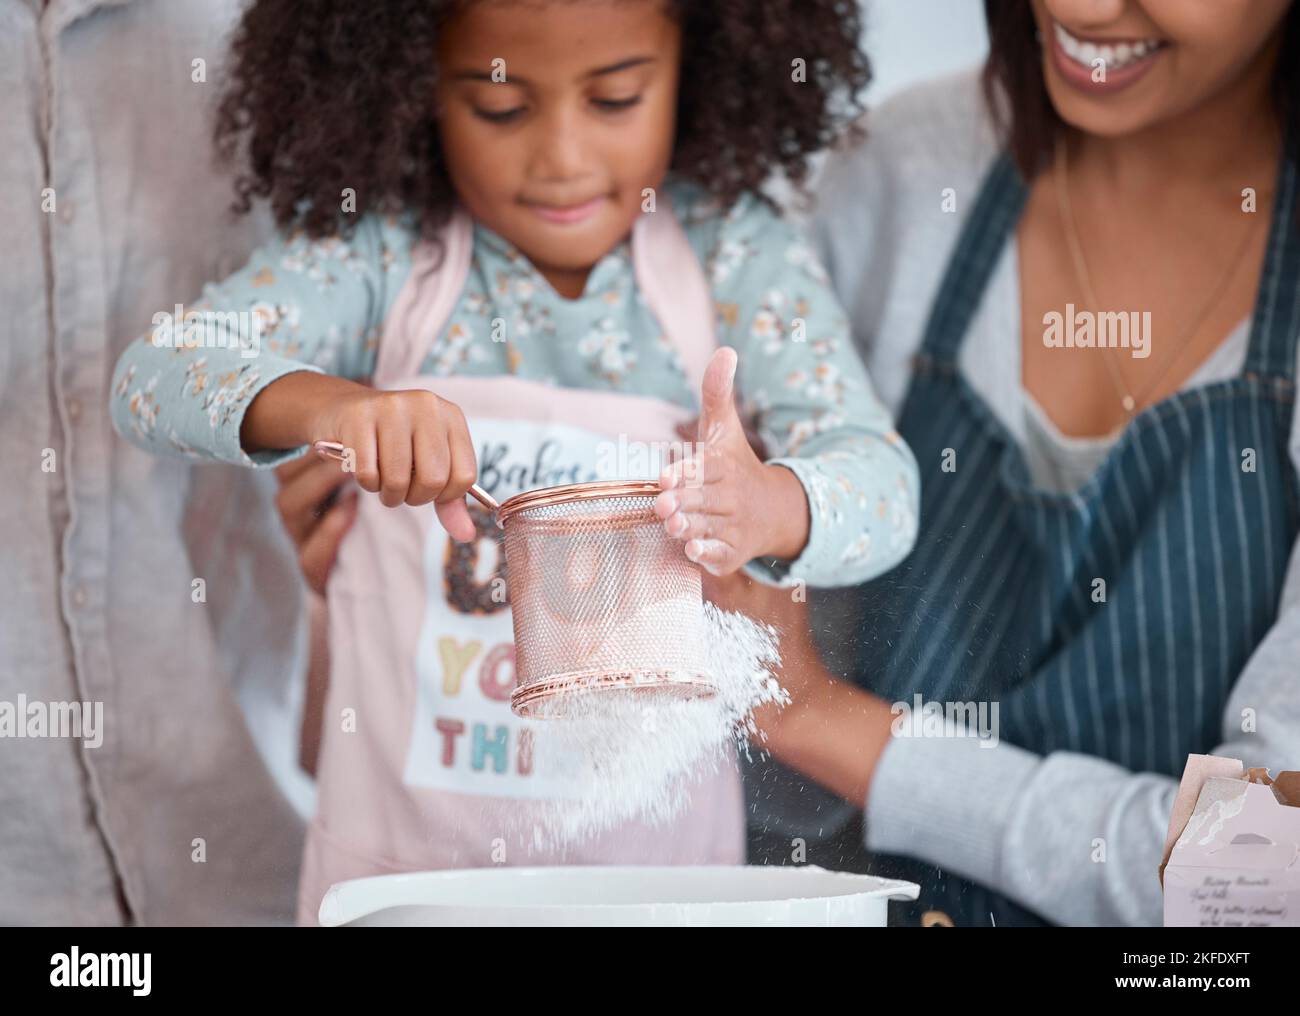 Hands, children and baking with a girl learning how to bake in the kitchen of her home with mother. Flour, kids and cooking with a female child and Stock Photo